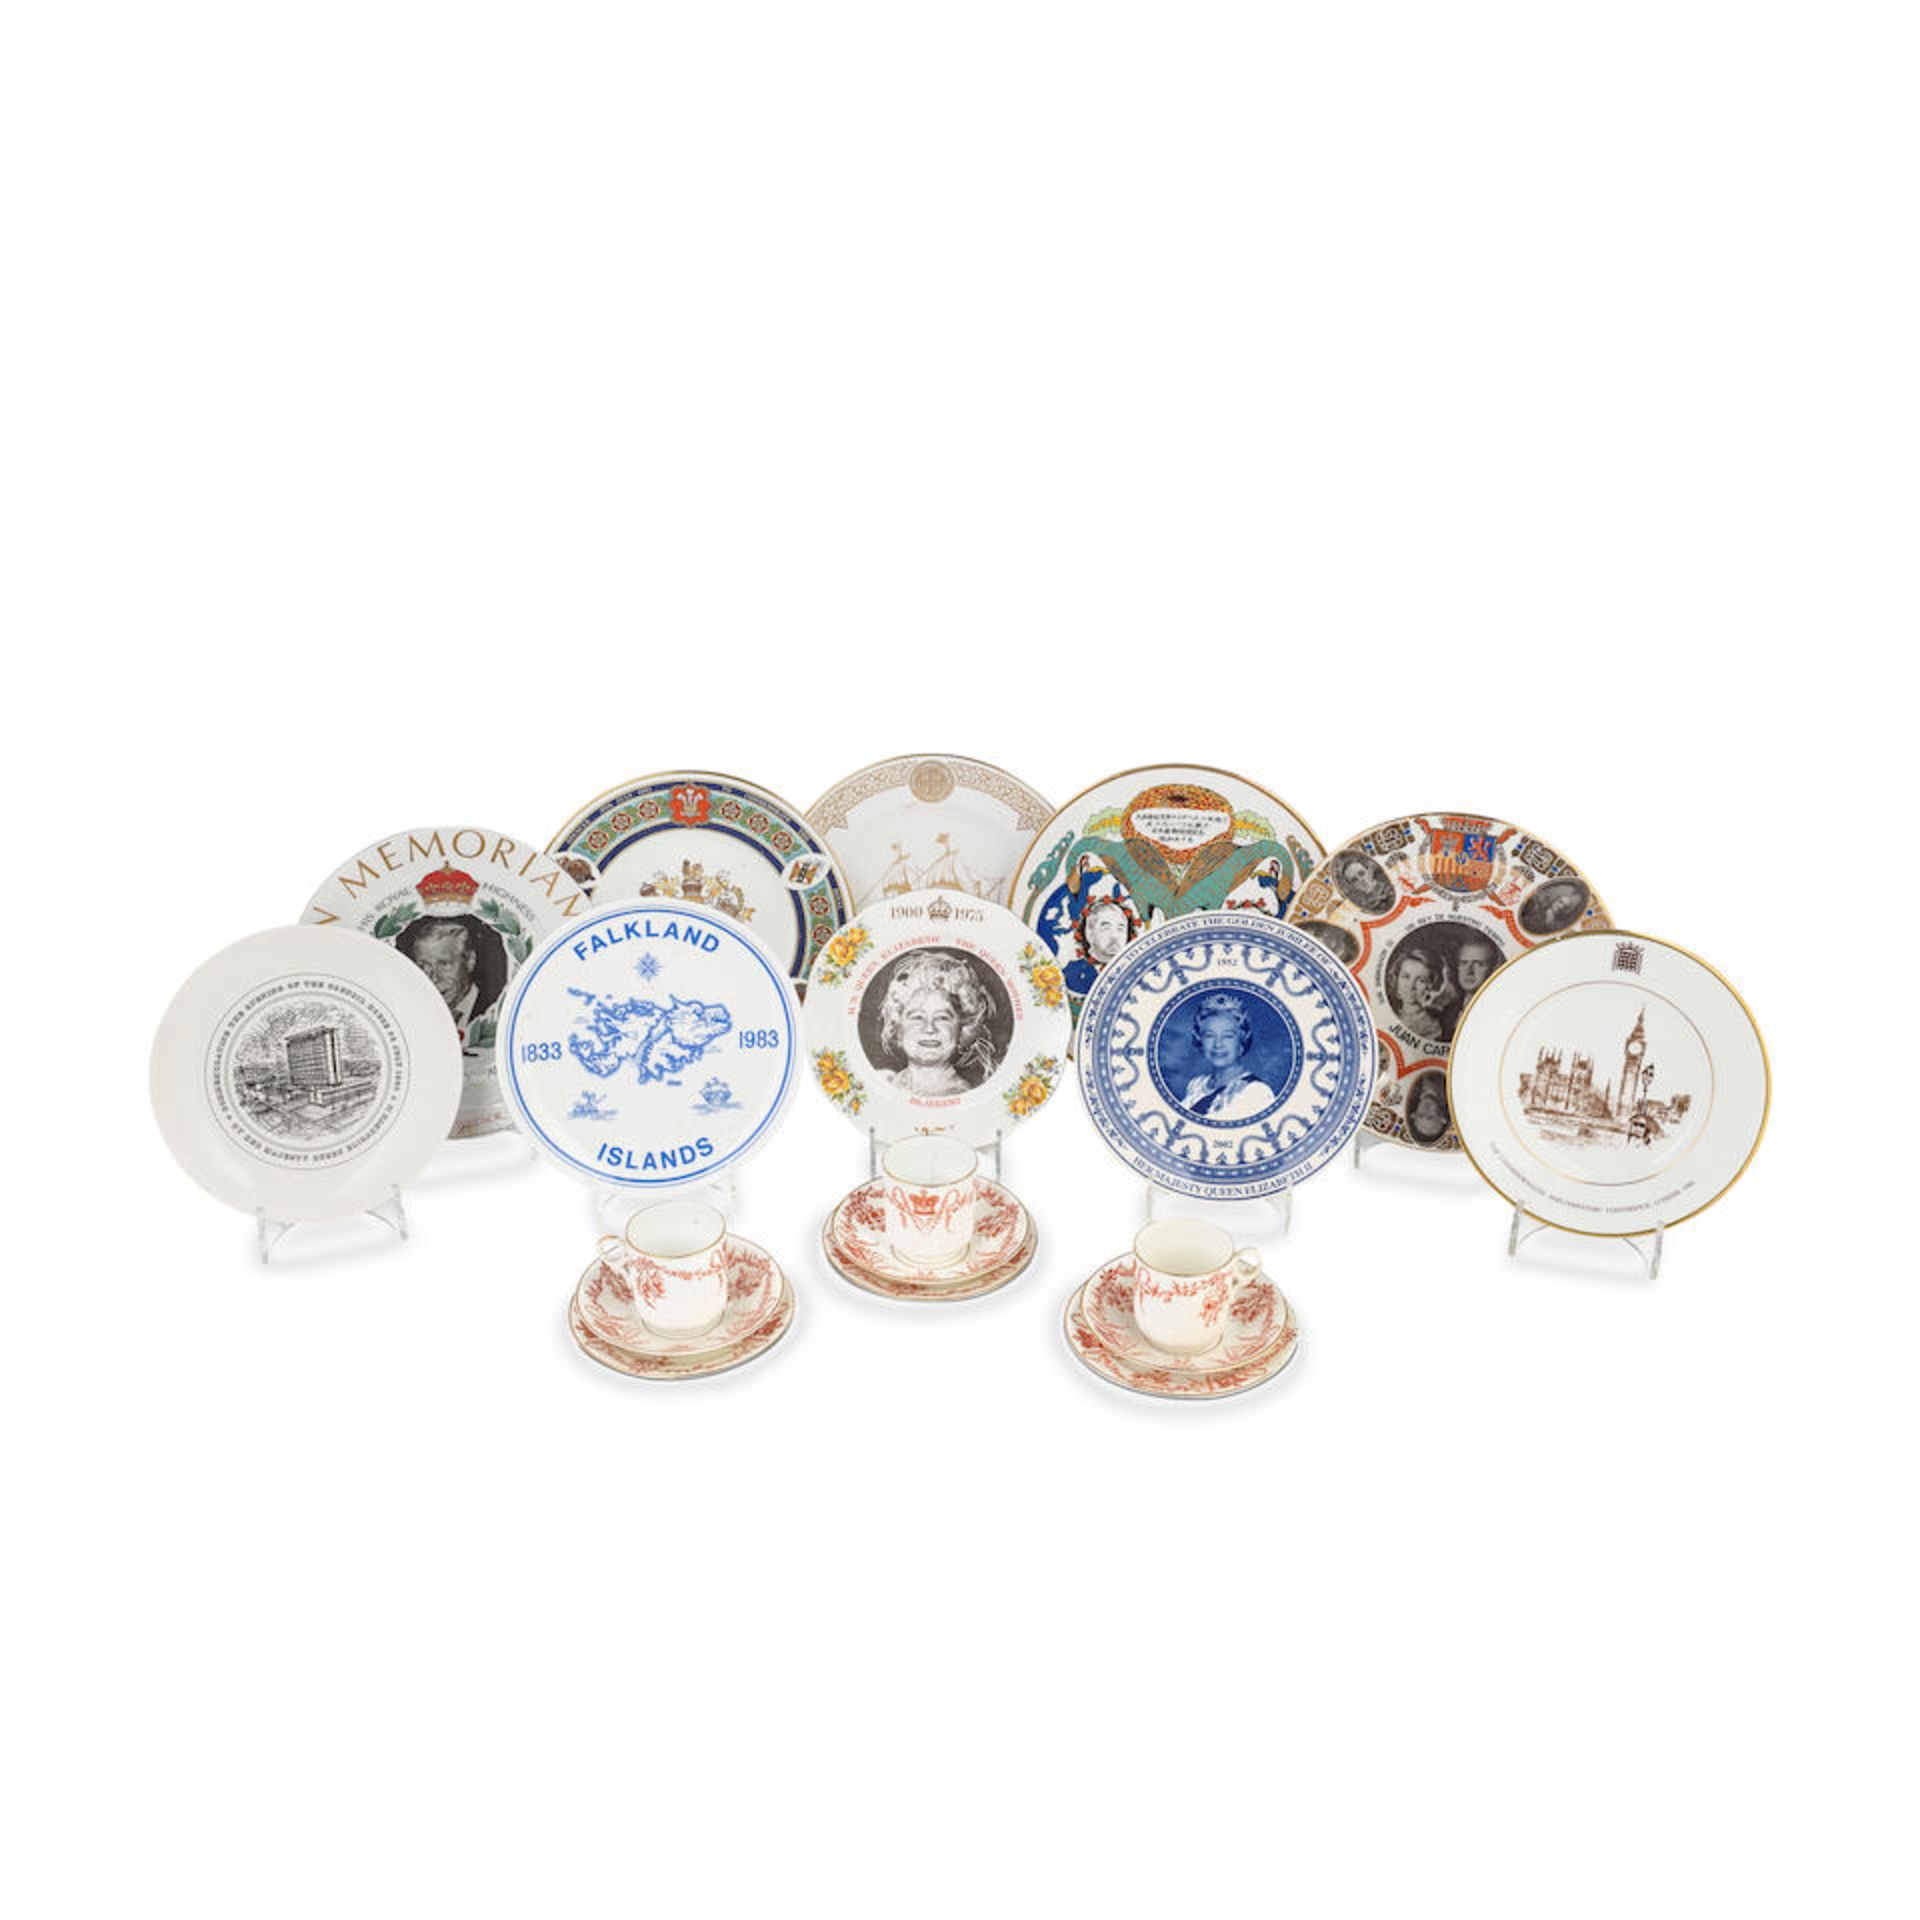 A selection of British commemorative porcelain plates Mid-20th century to early 21st century